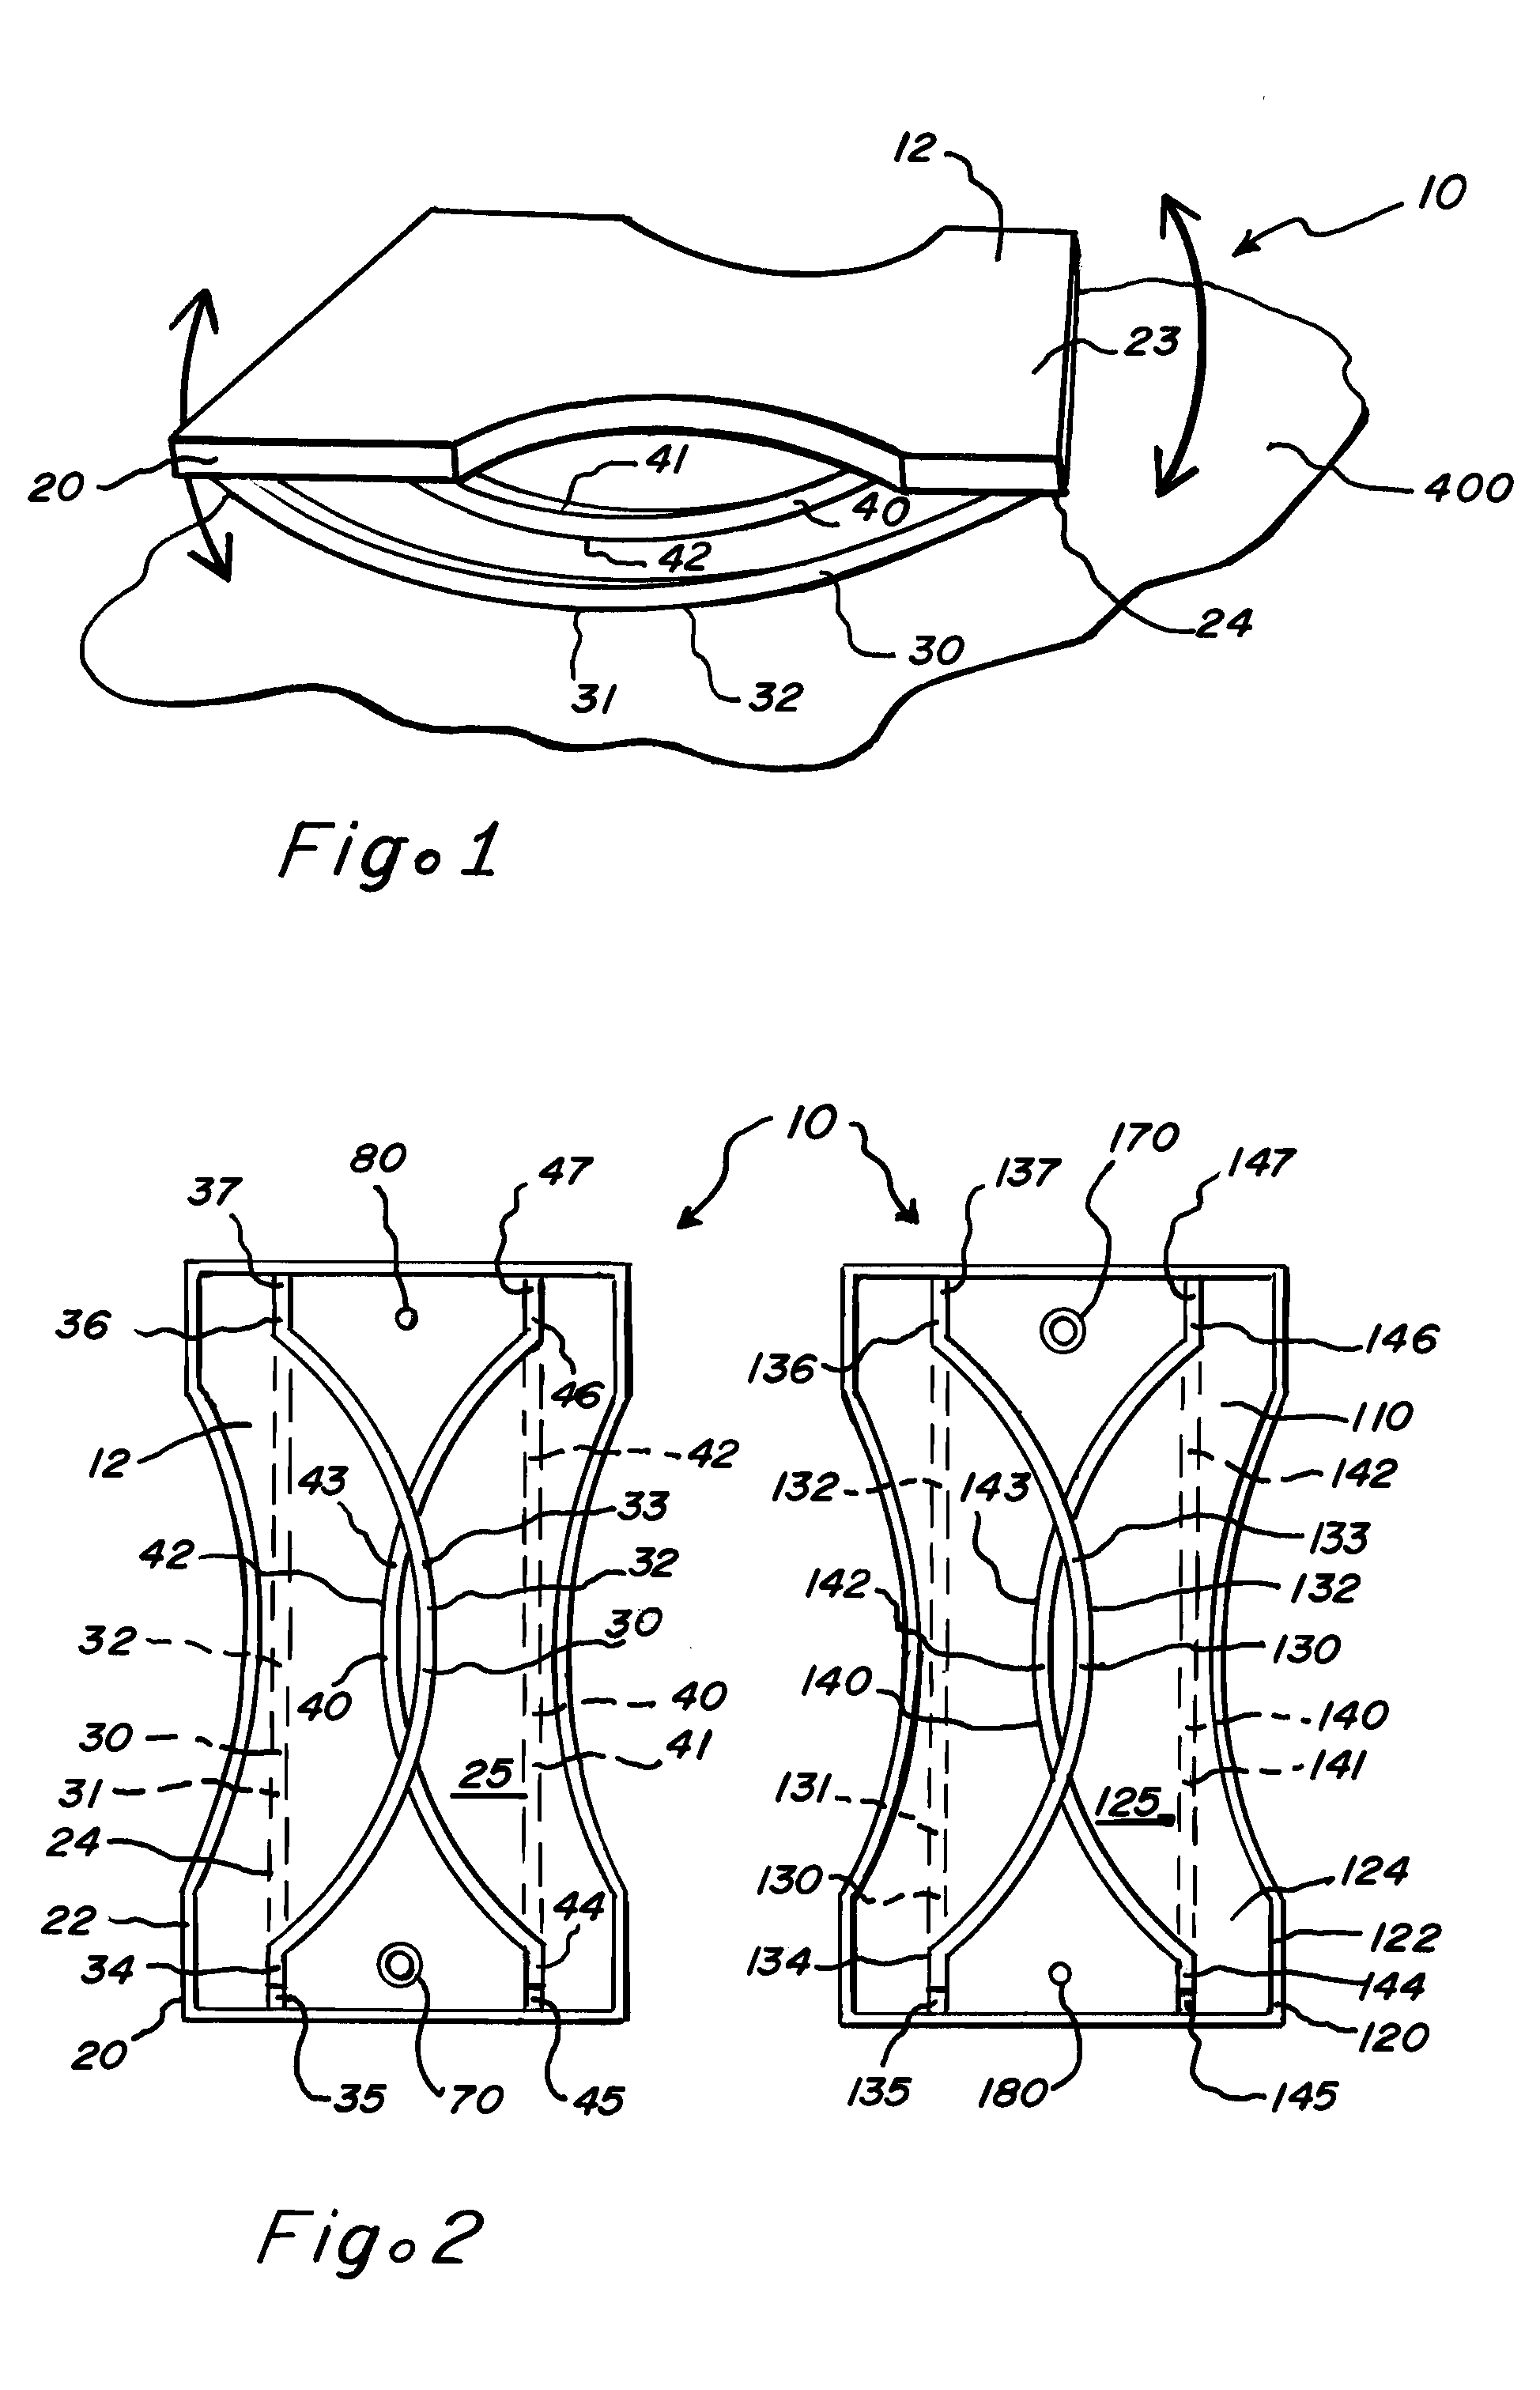 Apparatus and methods for the prevention of venous thromboembolism